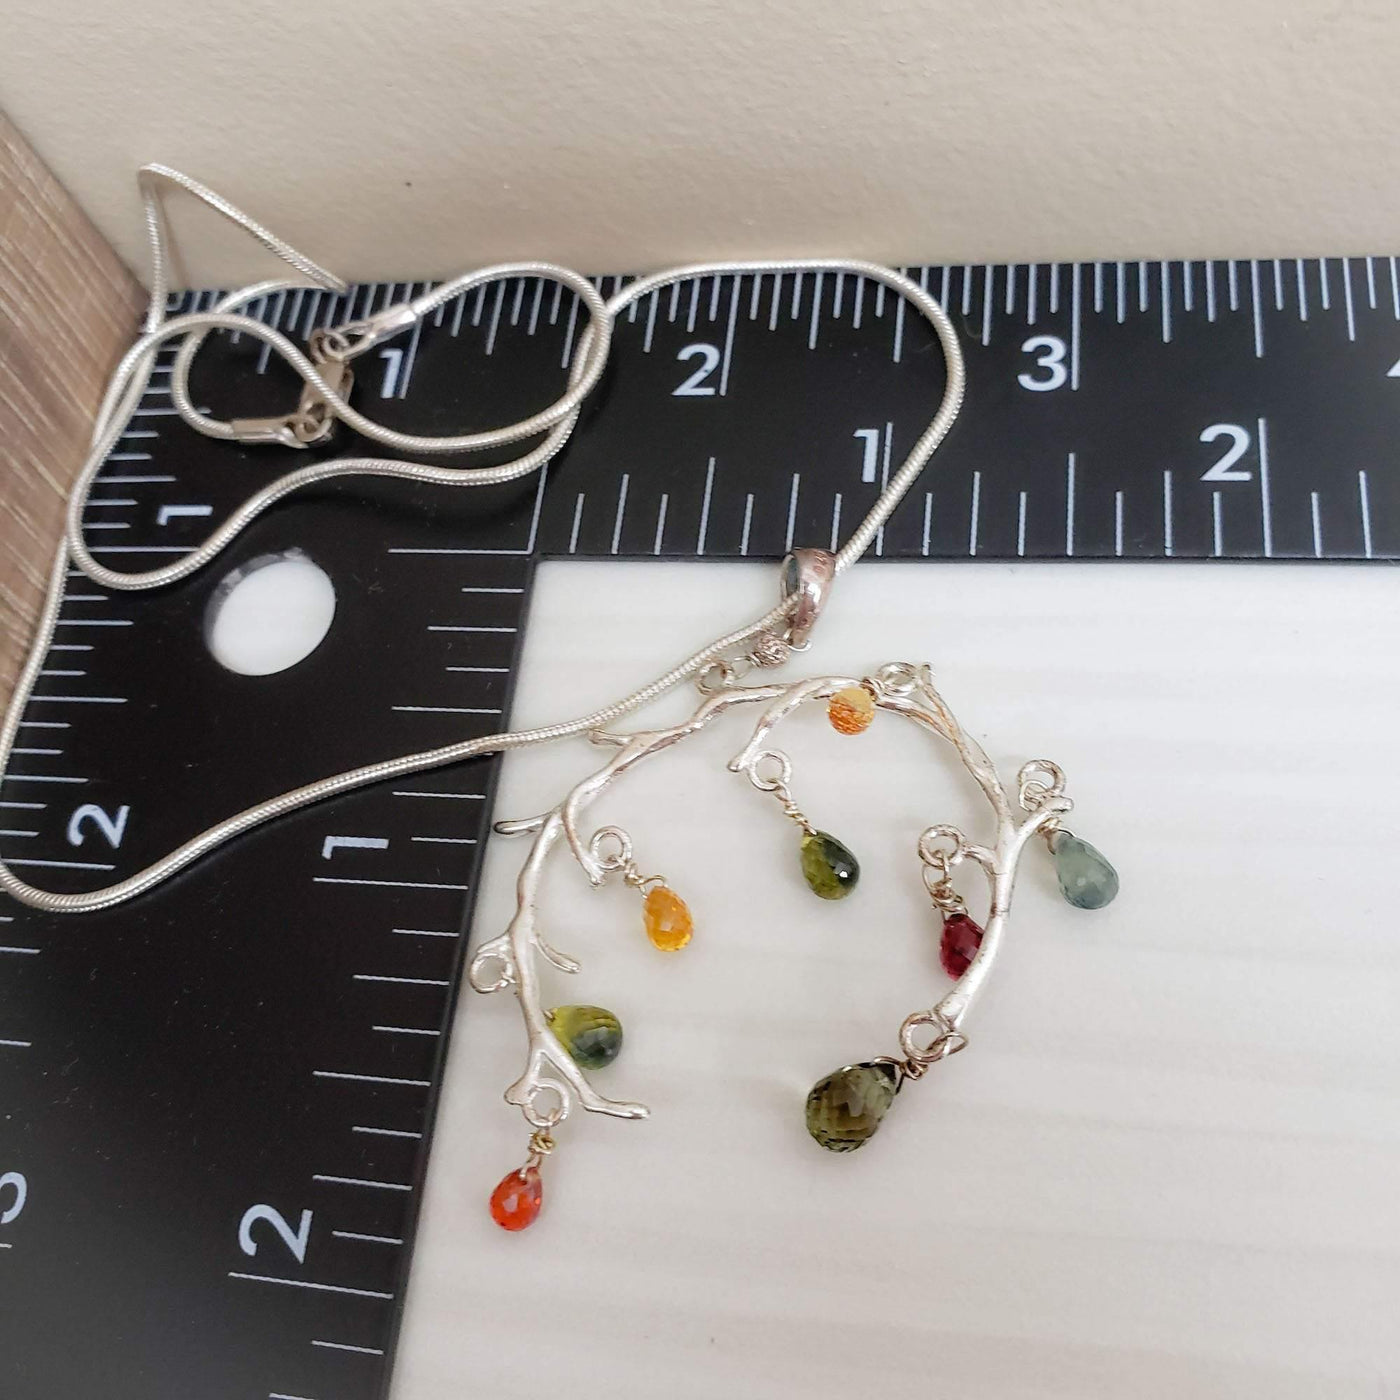 Natural Faceted Multicolor Sapphire and Sterling Silver tree branch necklace - LB Designs